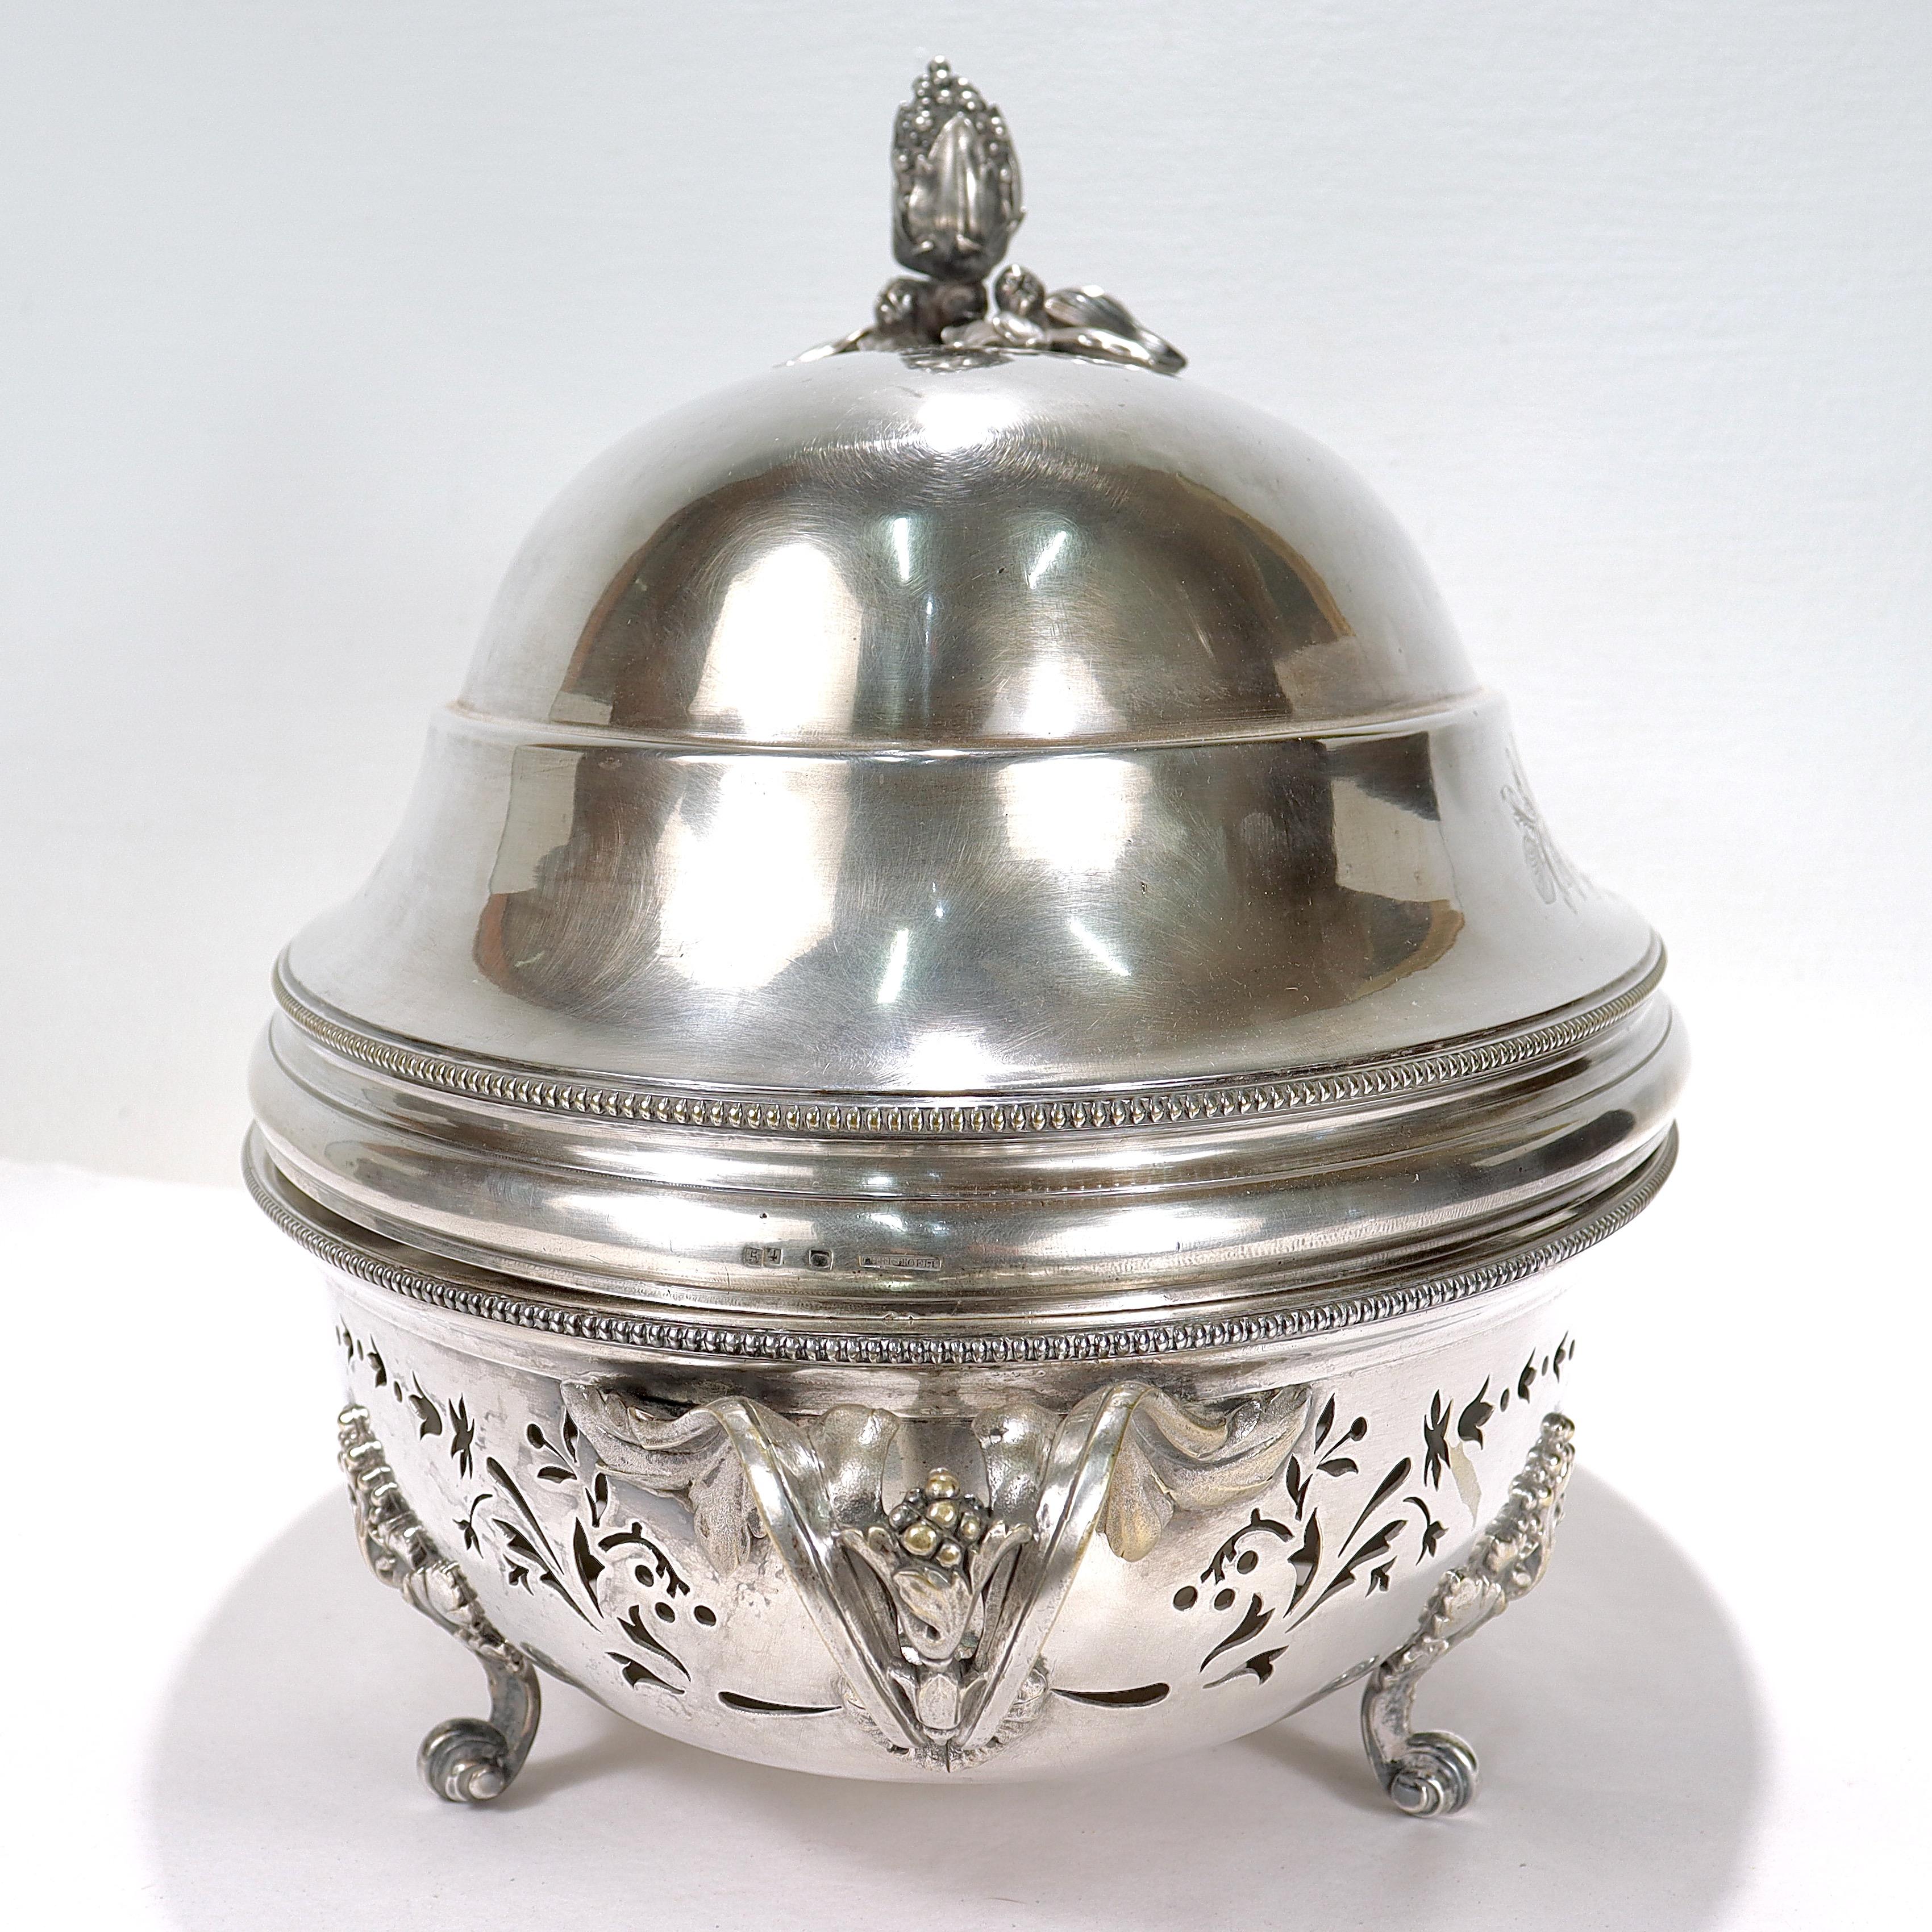 Antique Christofle Silver Plated Food Warmer / Tureen & Covered Dome In Fair Condition For Sale In Philadelphia, PA